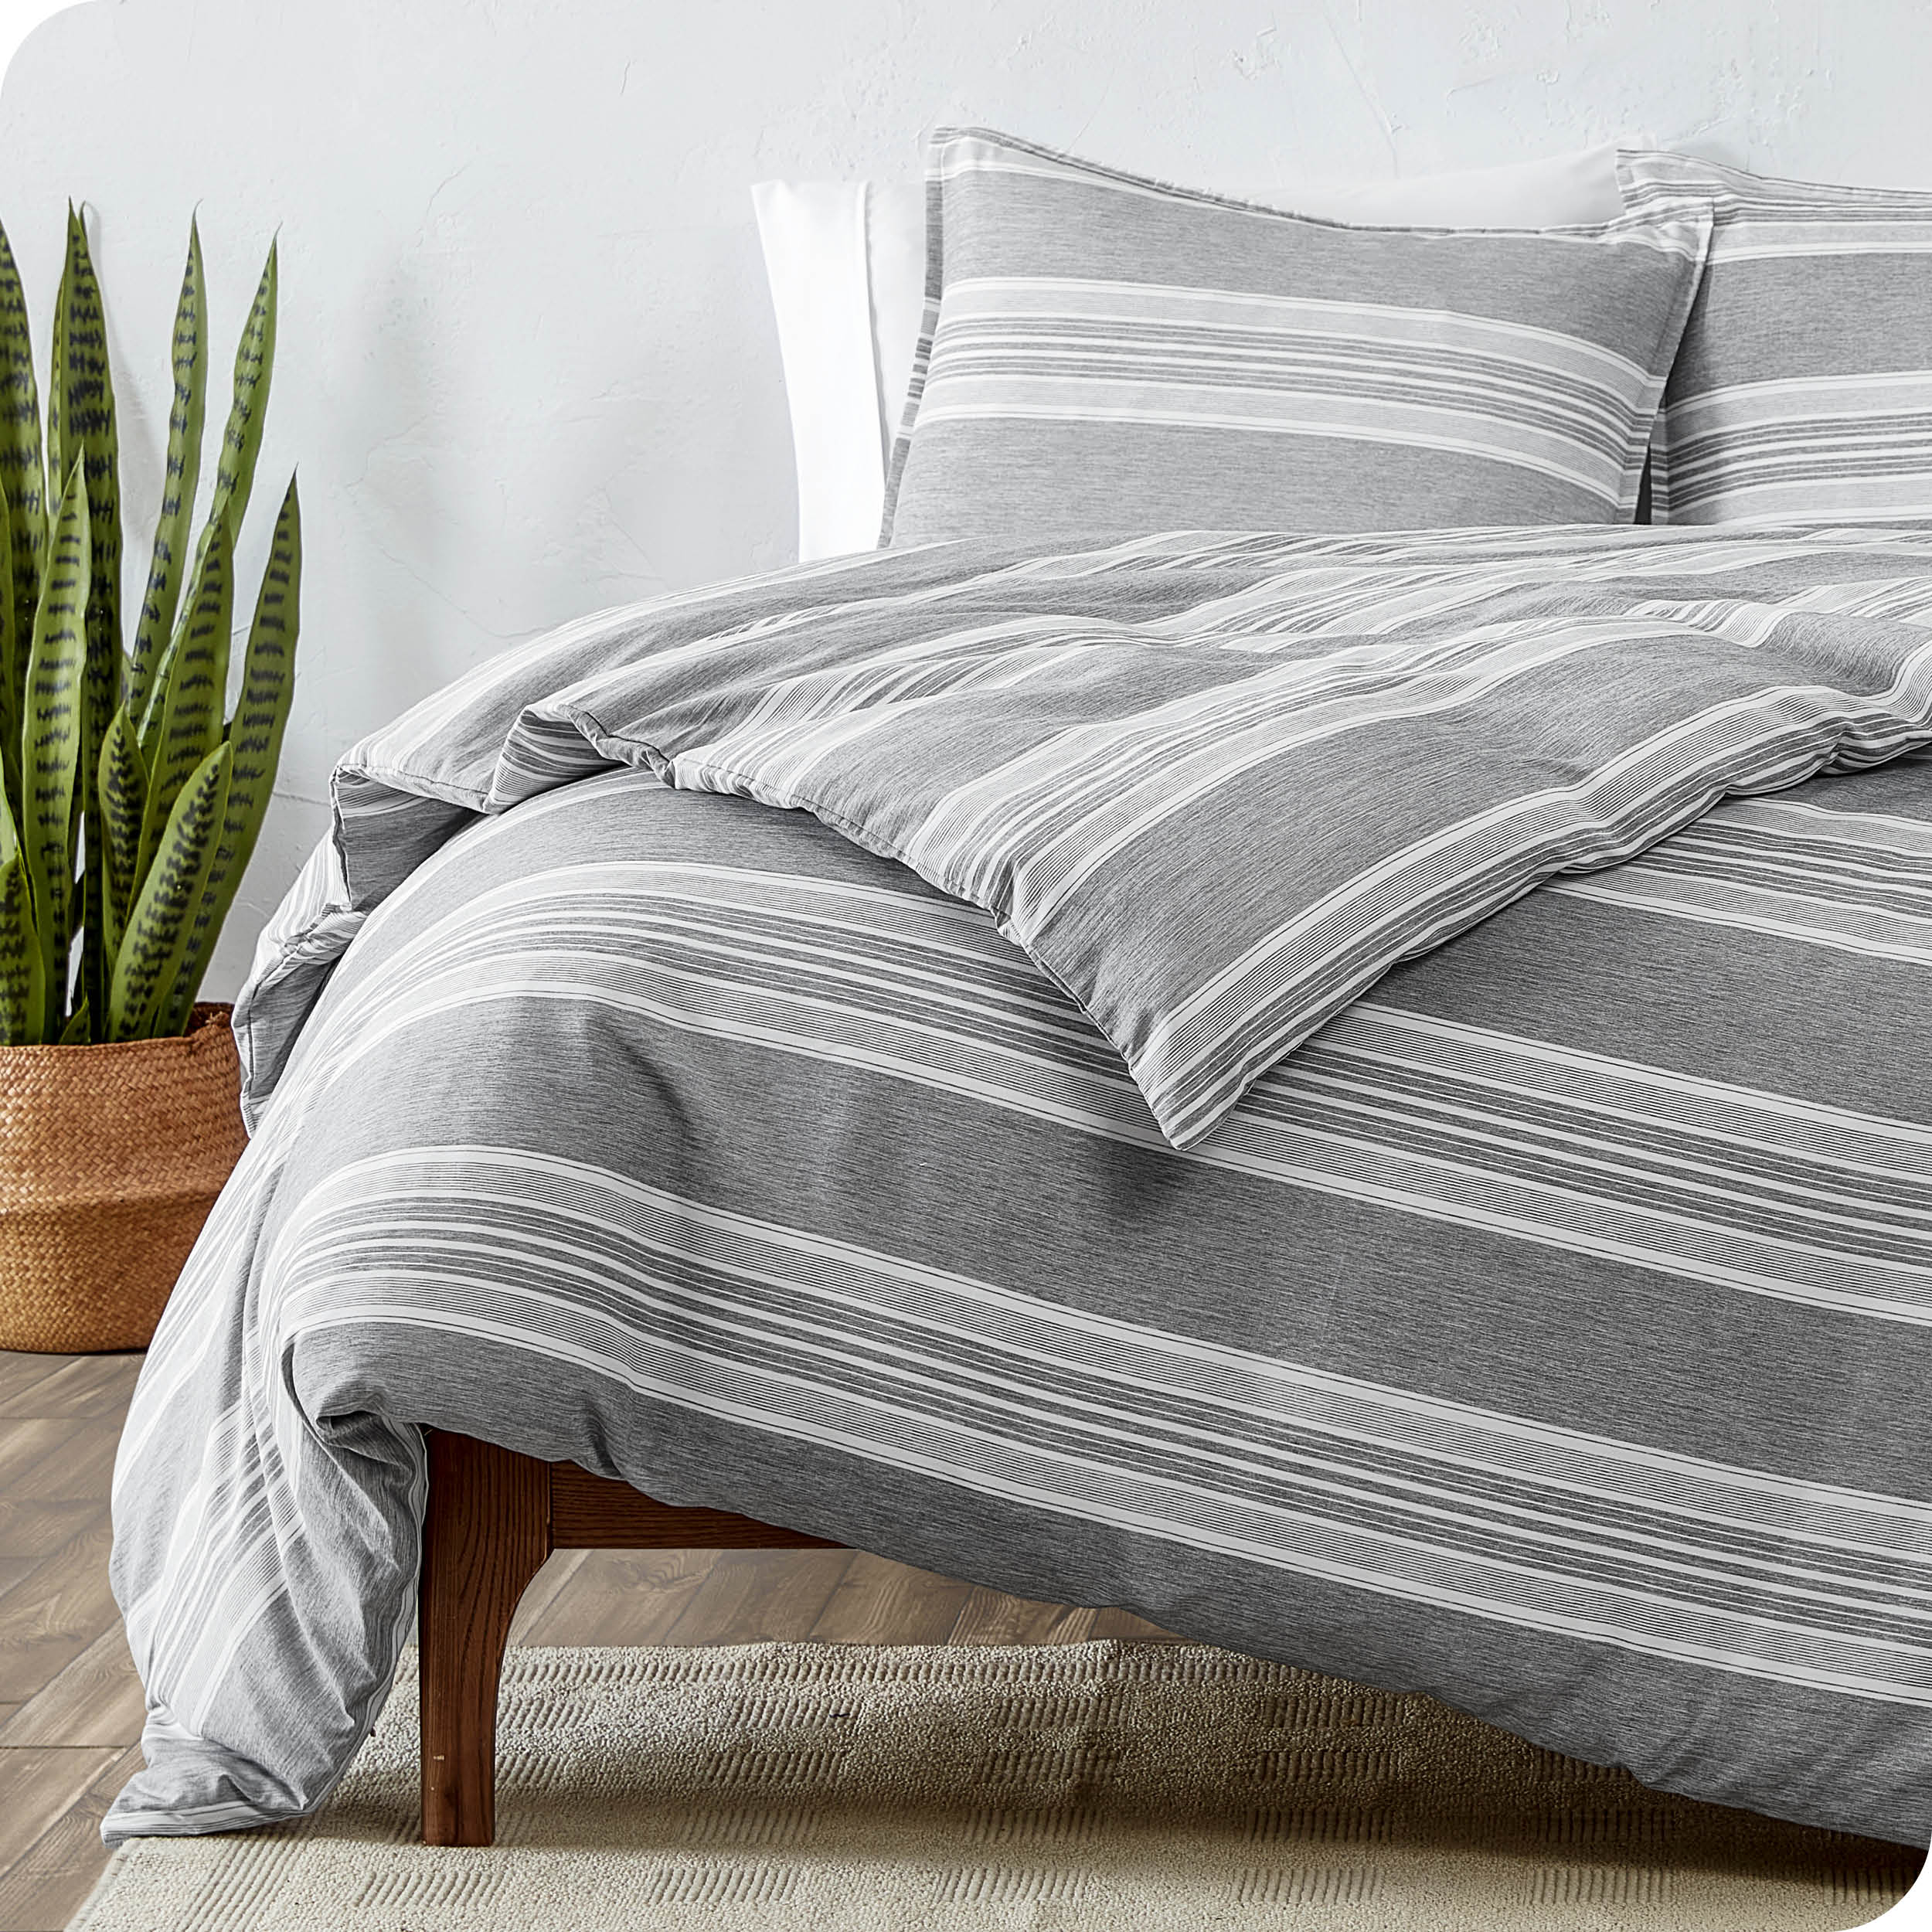 A modern bed with a printed microfiber duvet cover and sham set.